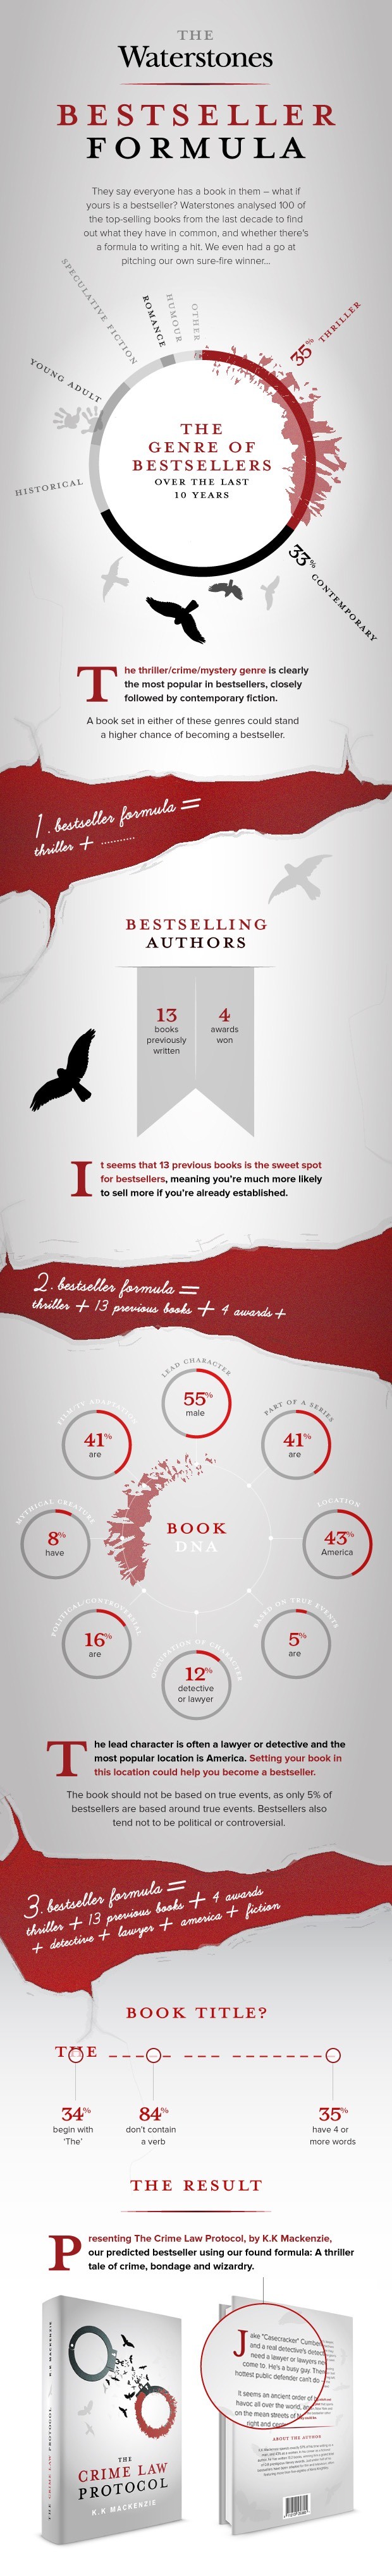 A-formula-for-the-best-selling-novel-full-infographic